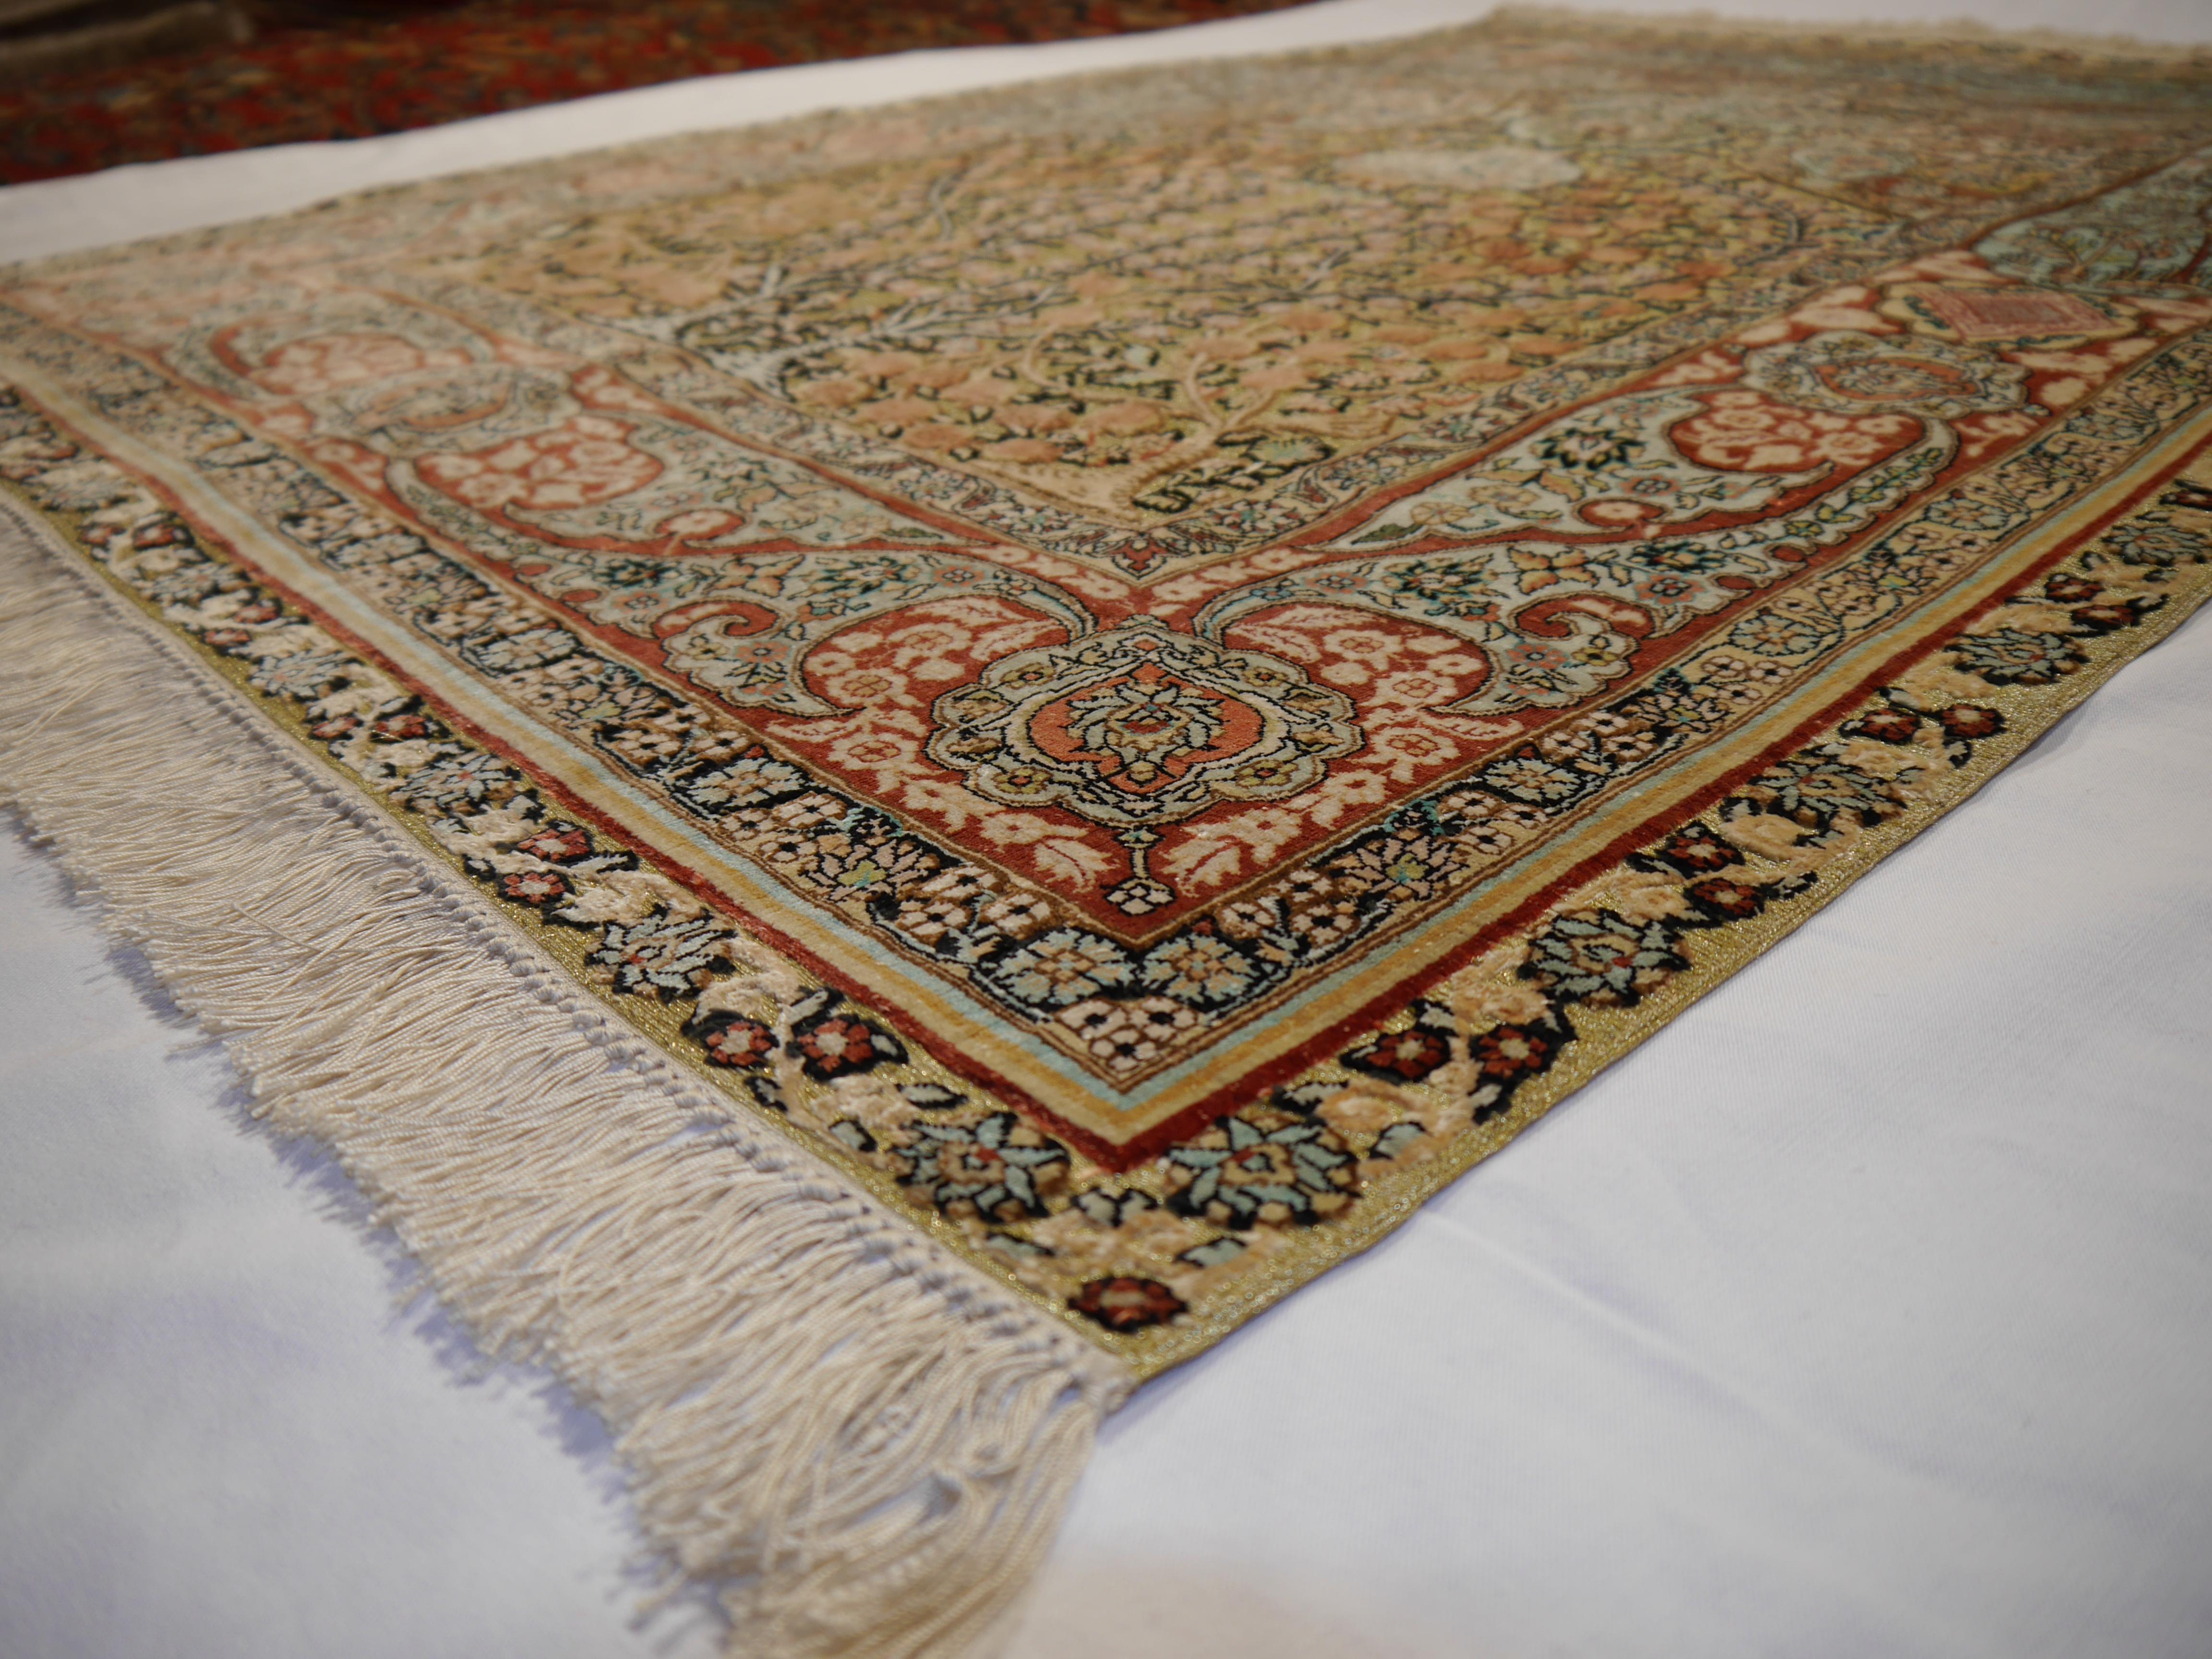 A beautiful Chinese silk souf rug with Hereke design
 
Construction
This decorative rug has a pile made of fine spun 100% pure organic mulberry silk combined with golden colored metal threats. The rug is very fine and dense, it has about 650